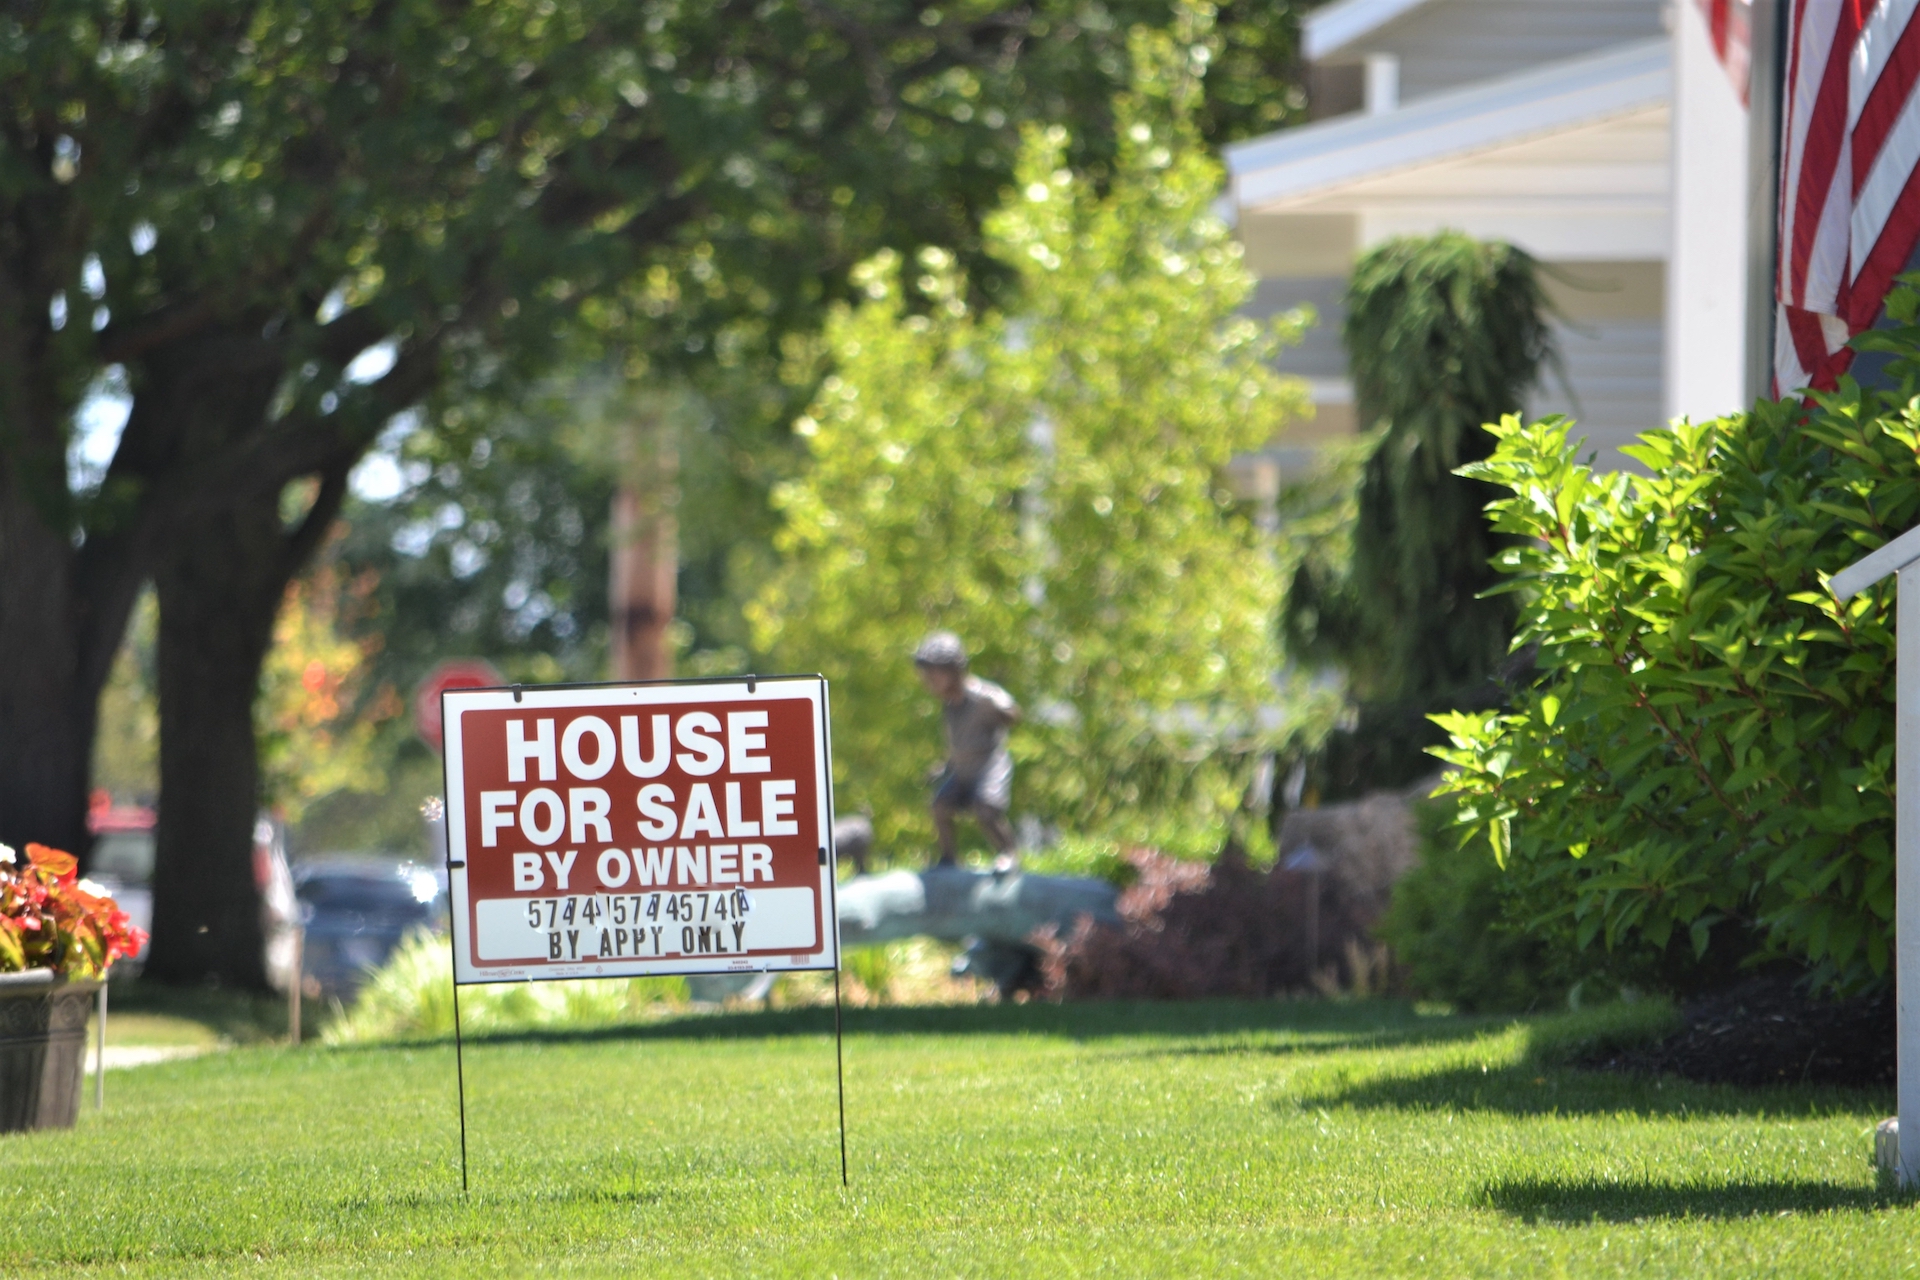 Transfer Tax: What to Expect When You Buy A House